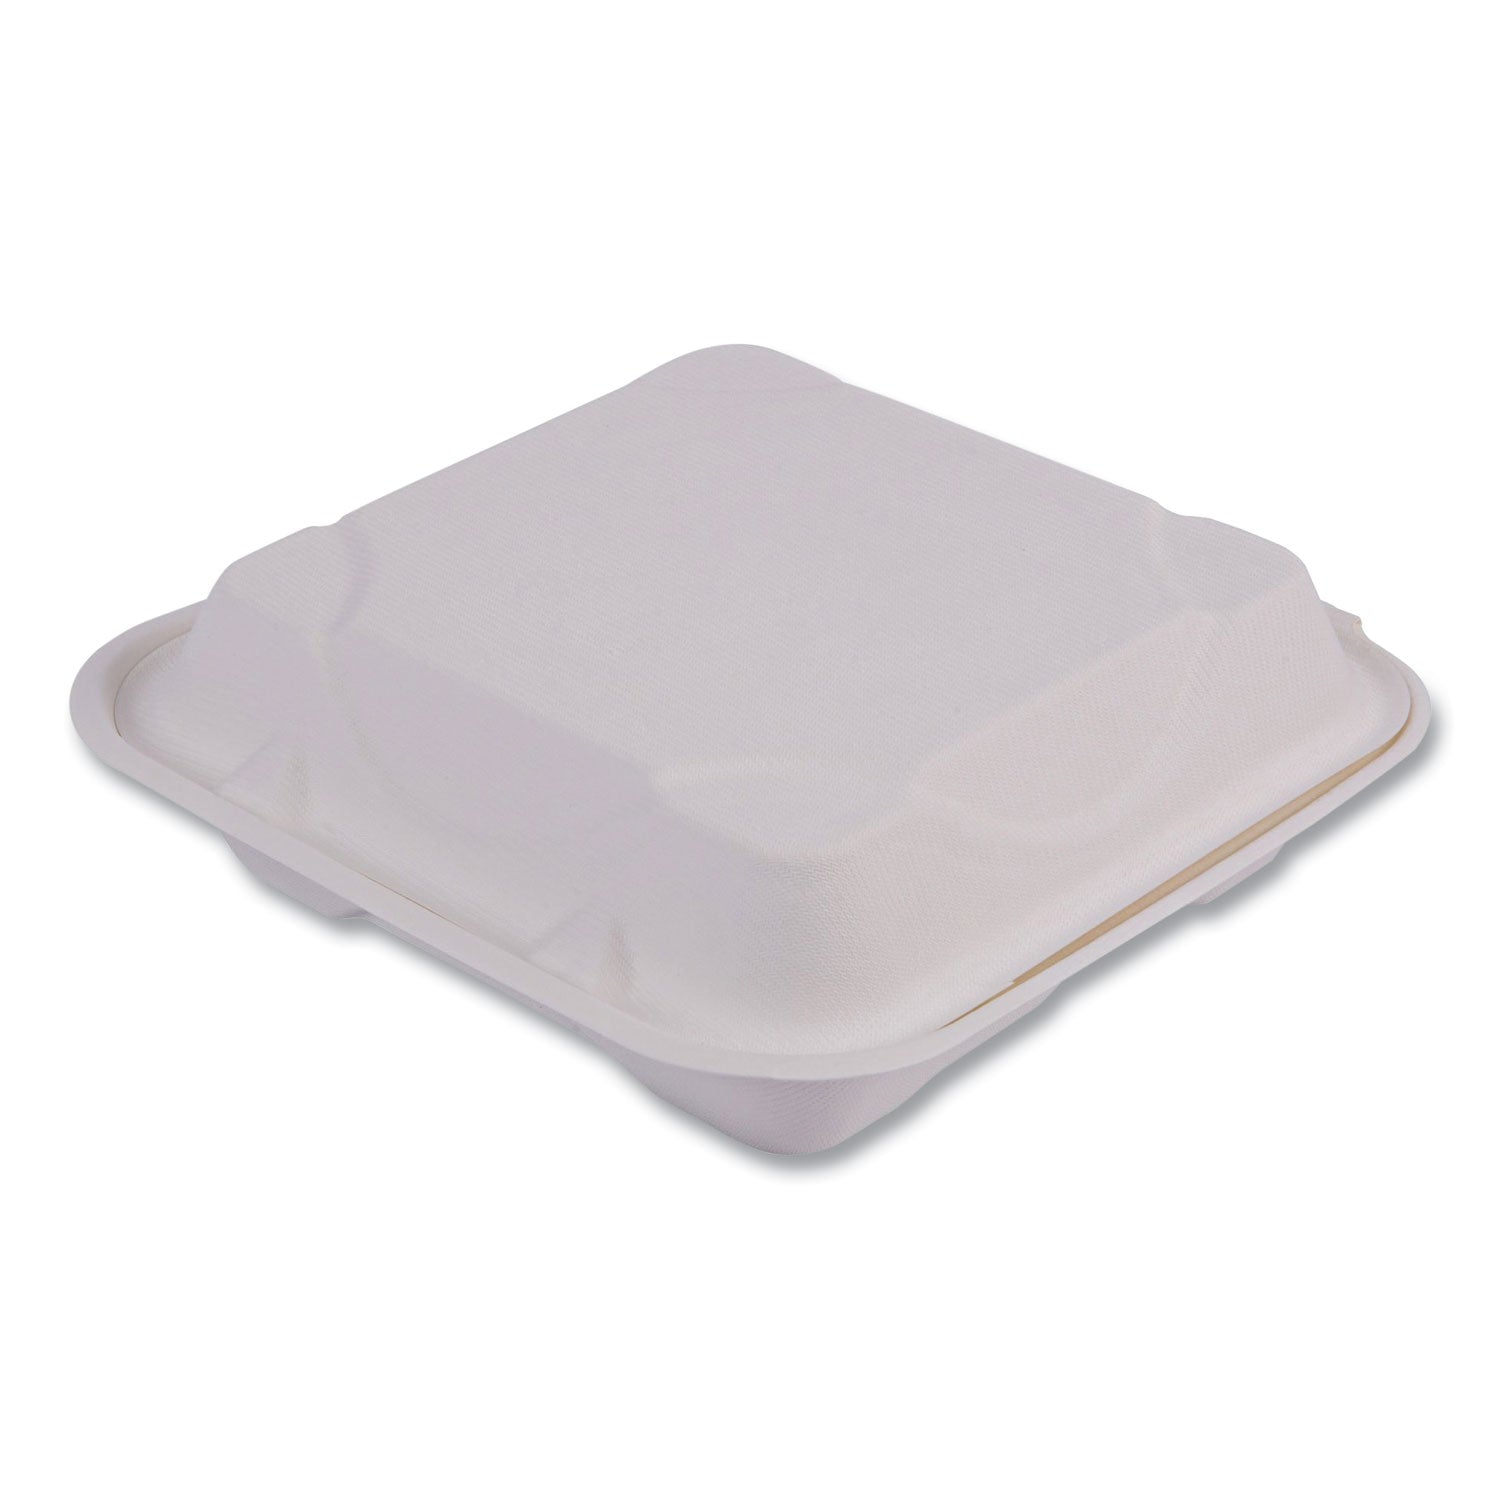 Bagasse Hinged Clamshell Containers, 3-Compartment, 9 x 9 x 3, White, Sugarcane, 50/Pack, 4 Packs/Carton - 